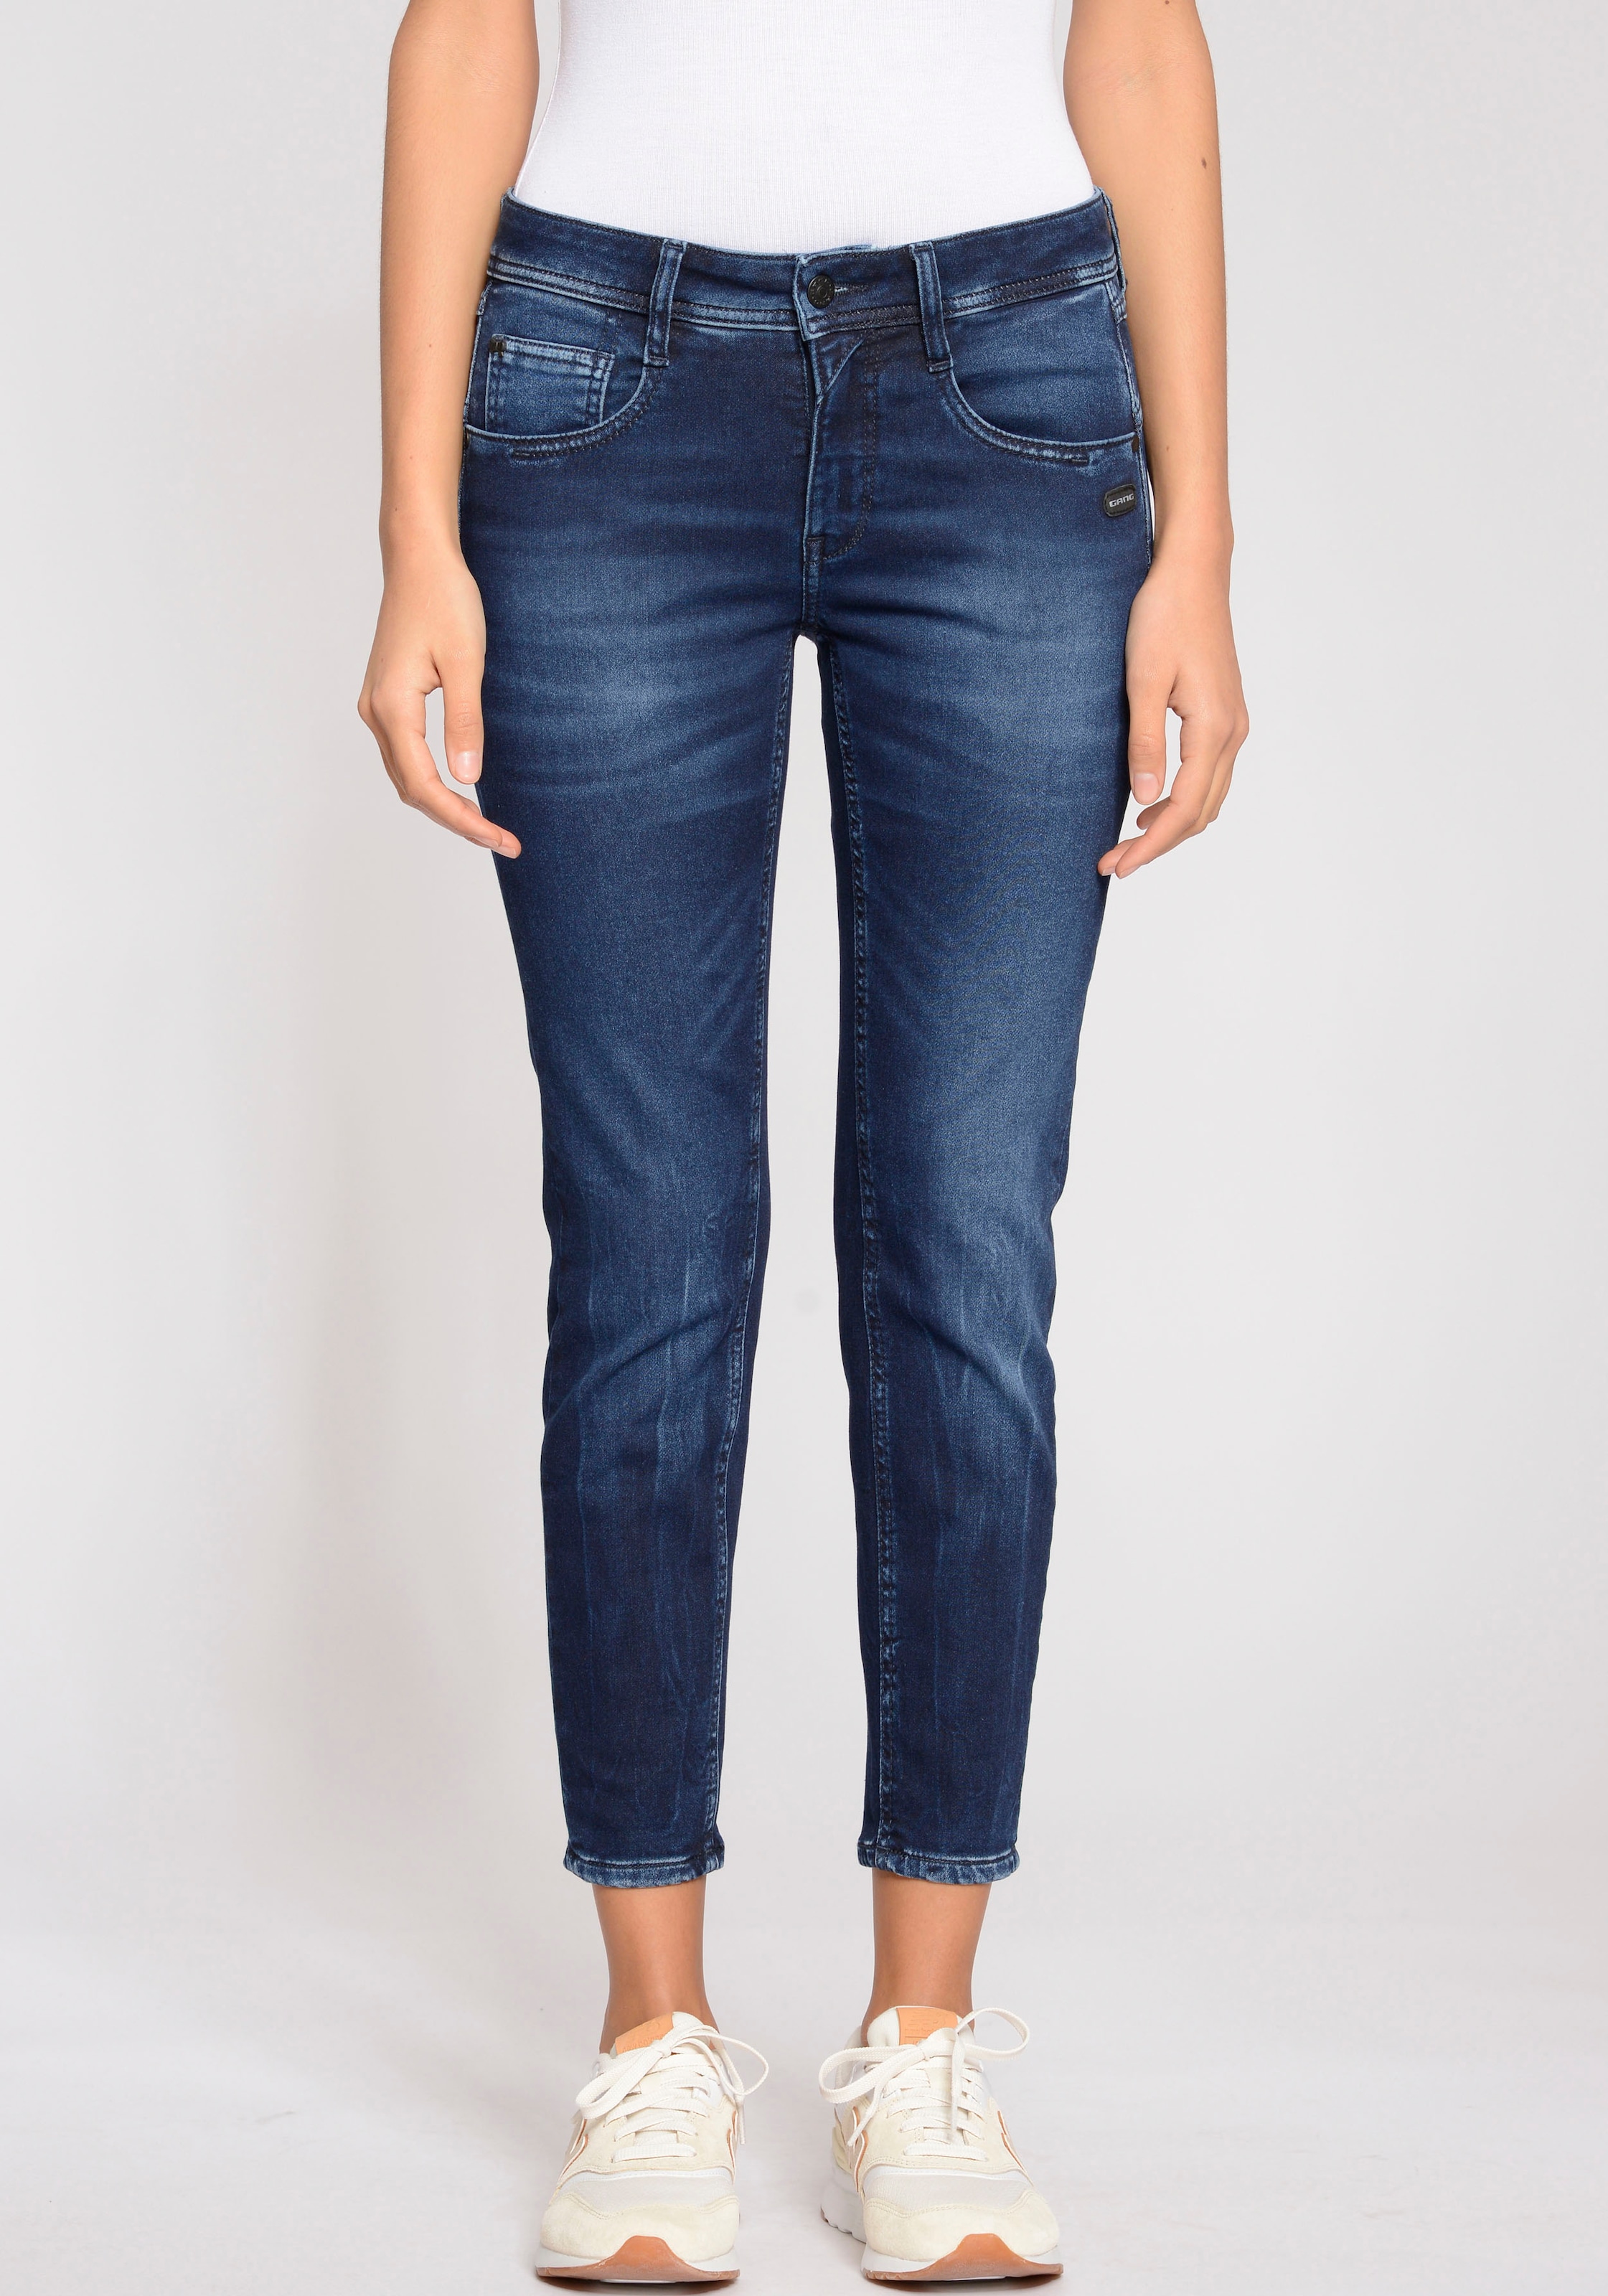 GANG Relax-fit-Jeans »94Amelie Cropped« kaufen bei OTTO